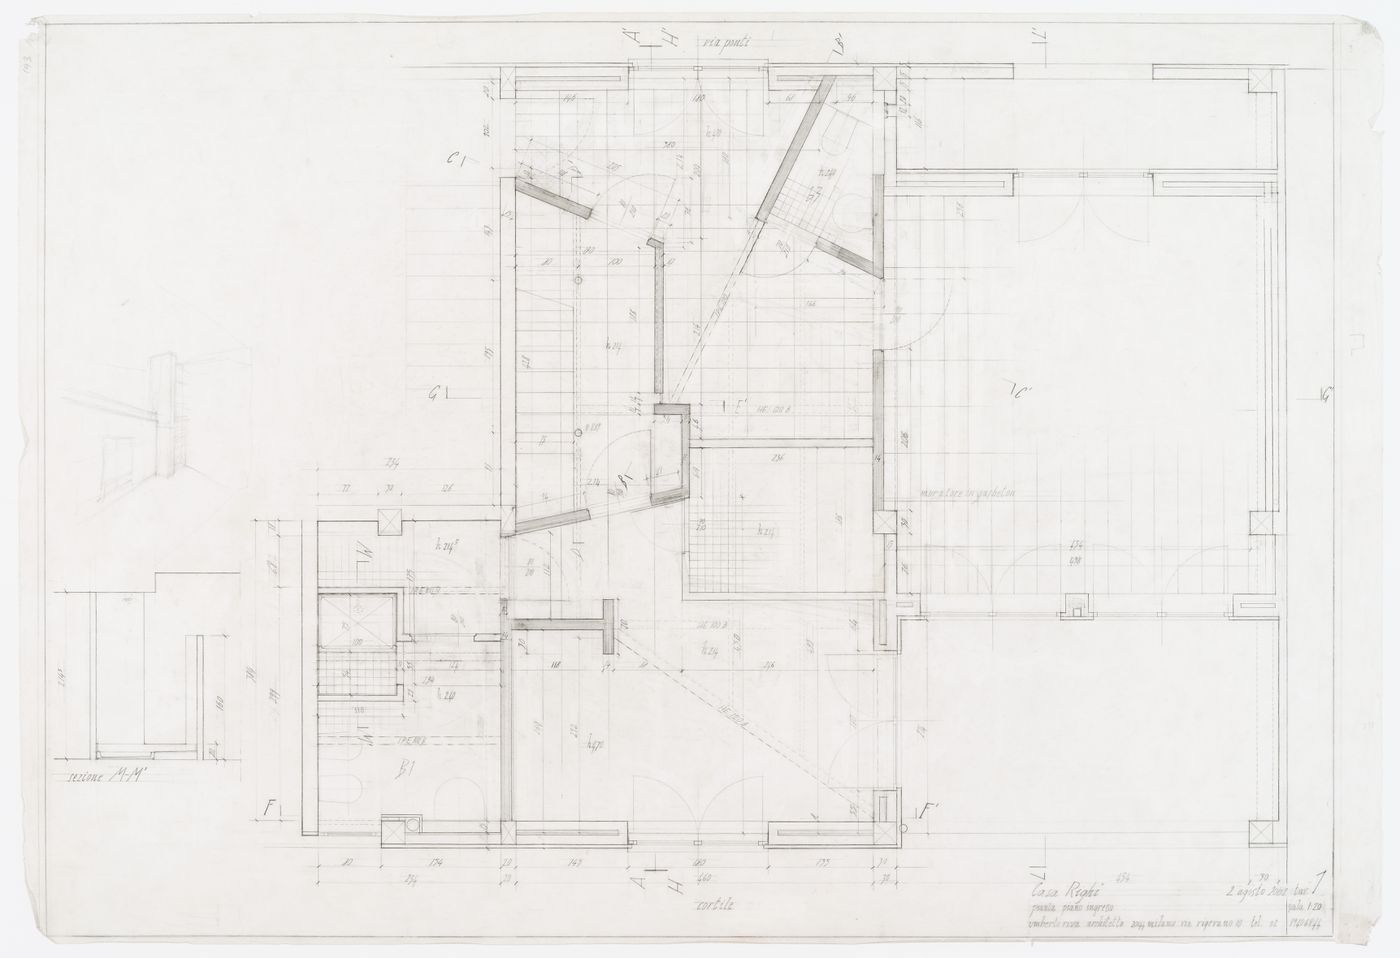 Floor plan, first floor, entrance and studio for Casa Righi, Milan, Italy